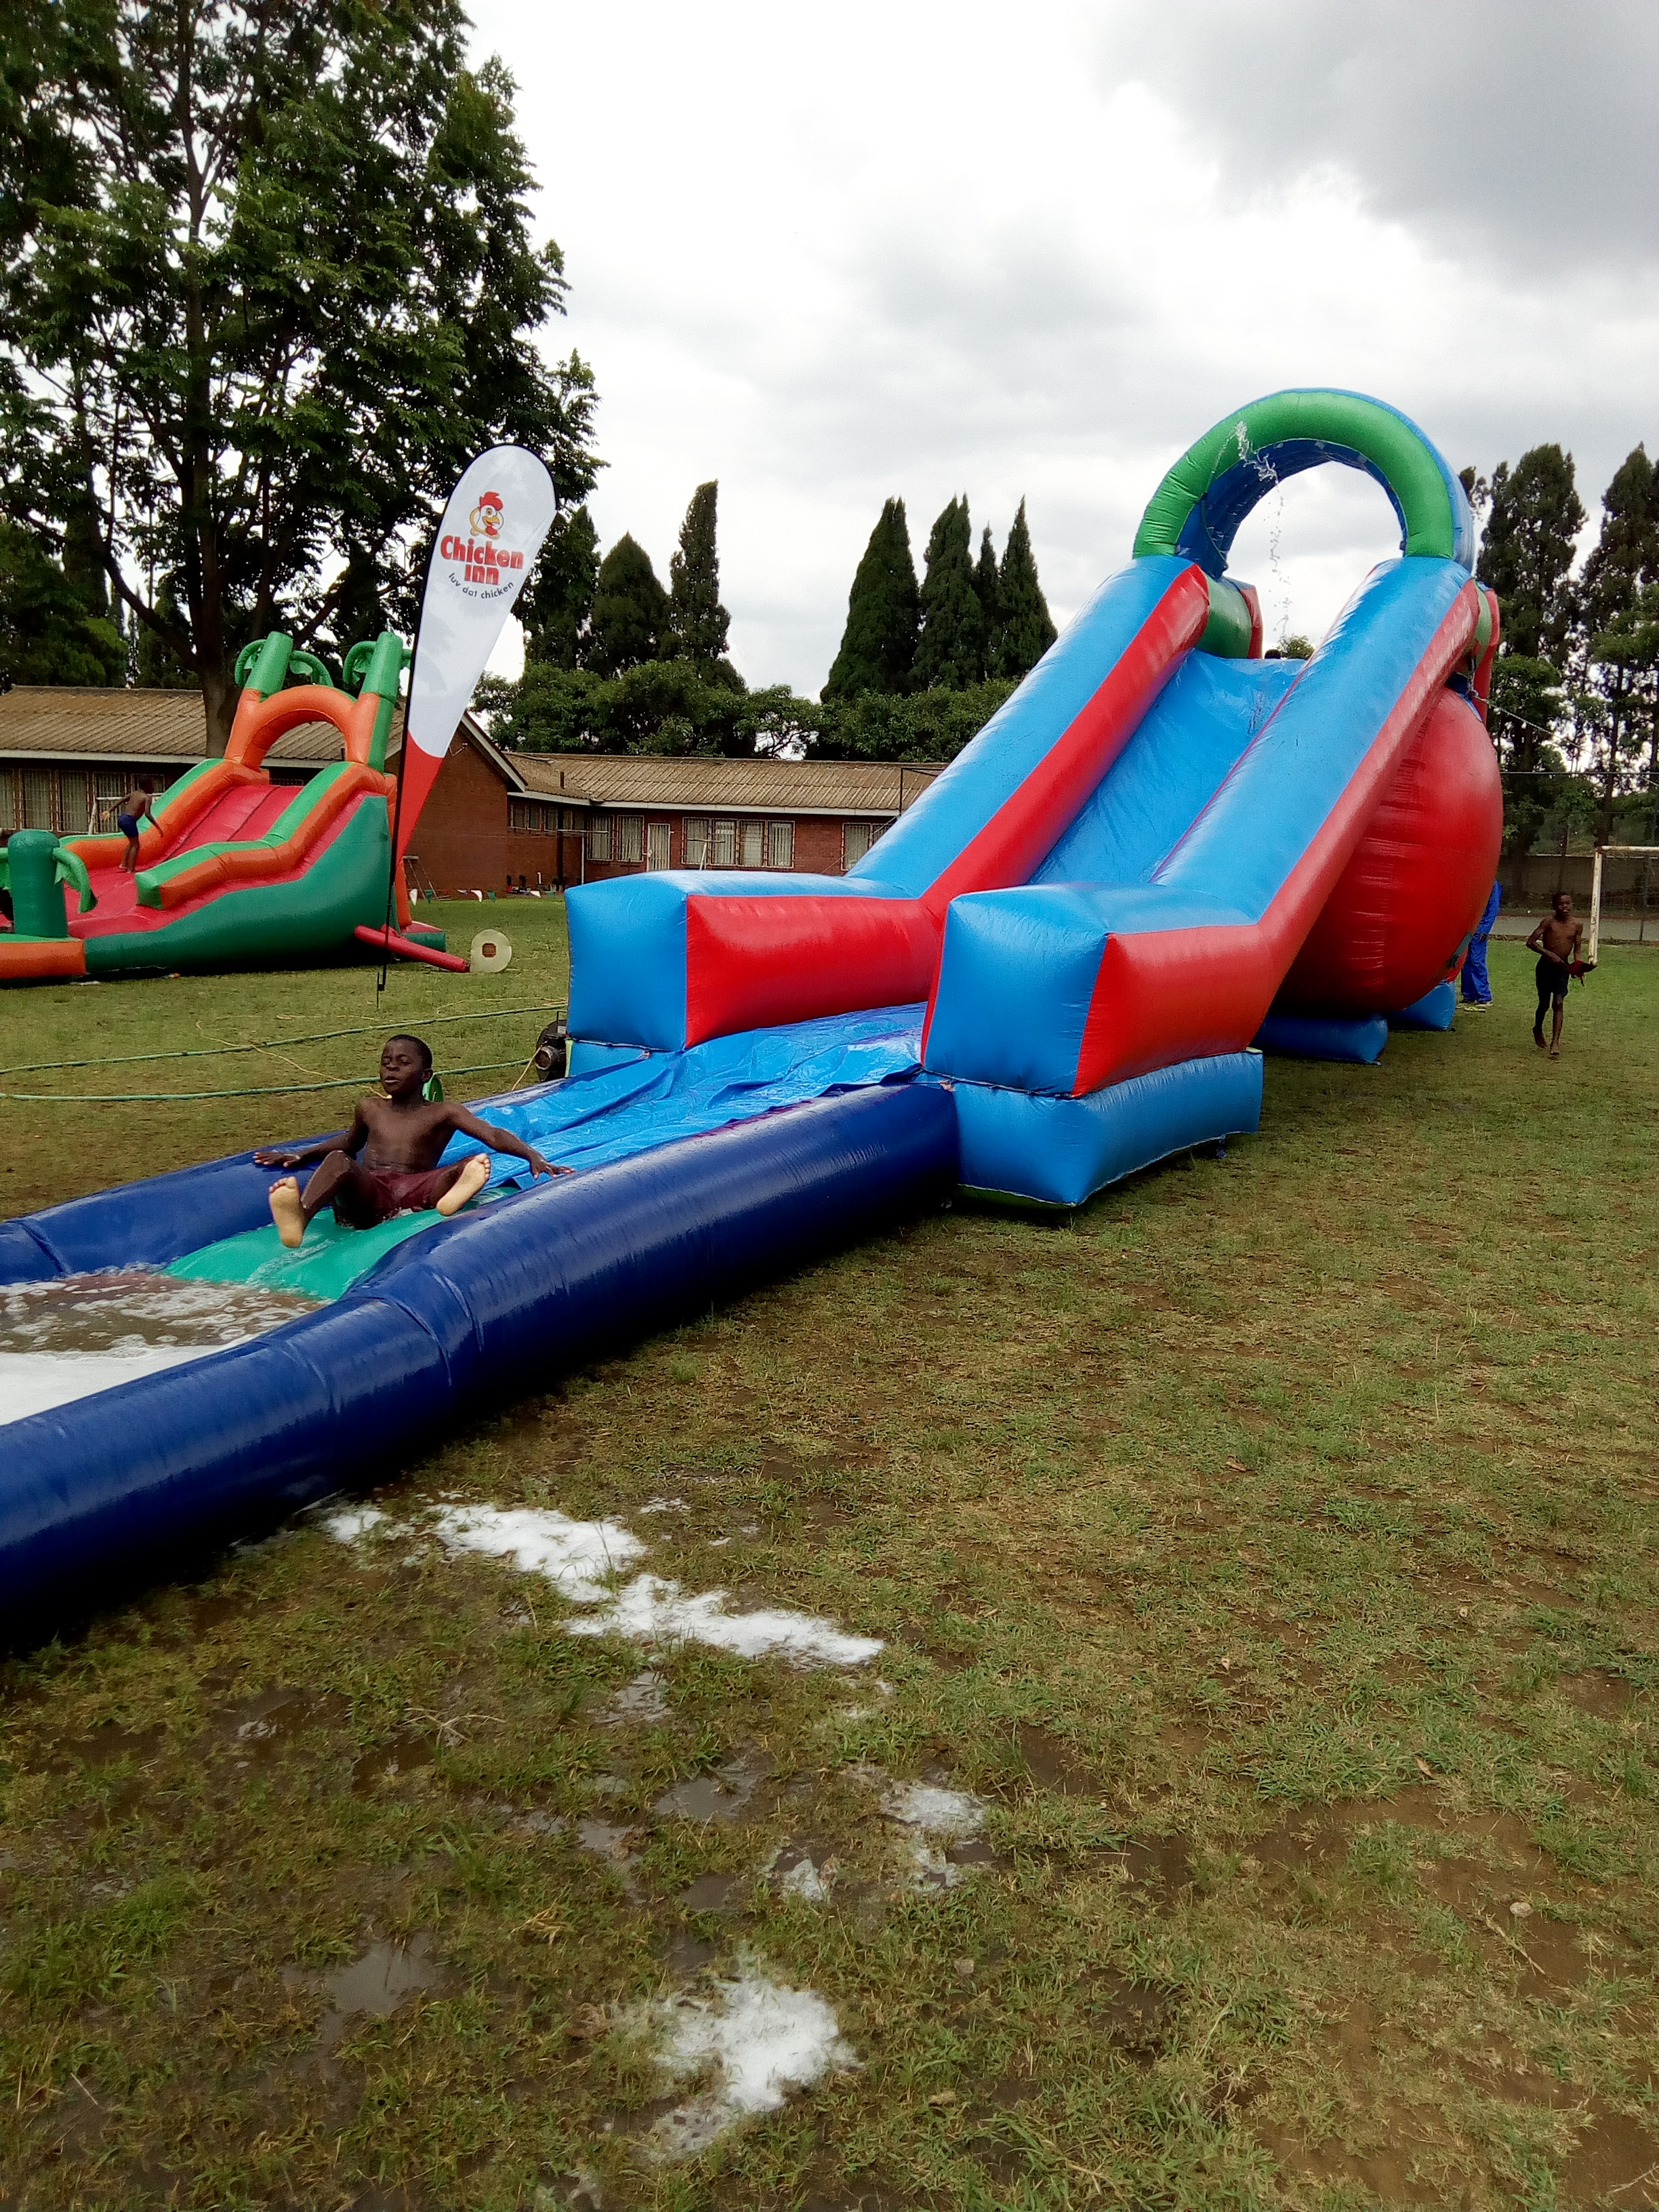 Water slides and bouncy castles are donated for their Funday celebrations